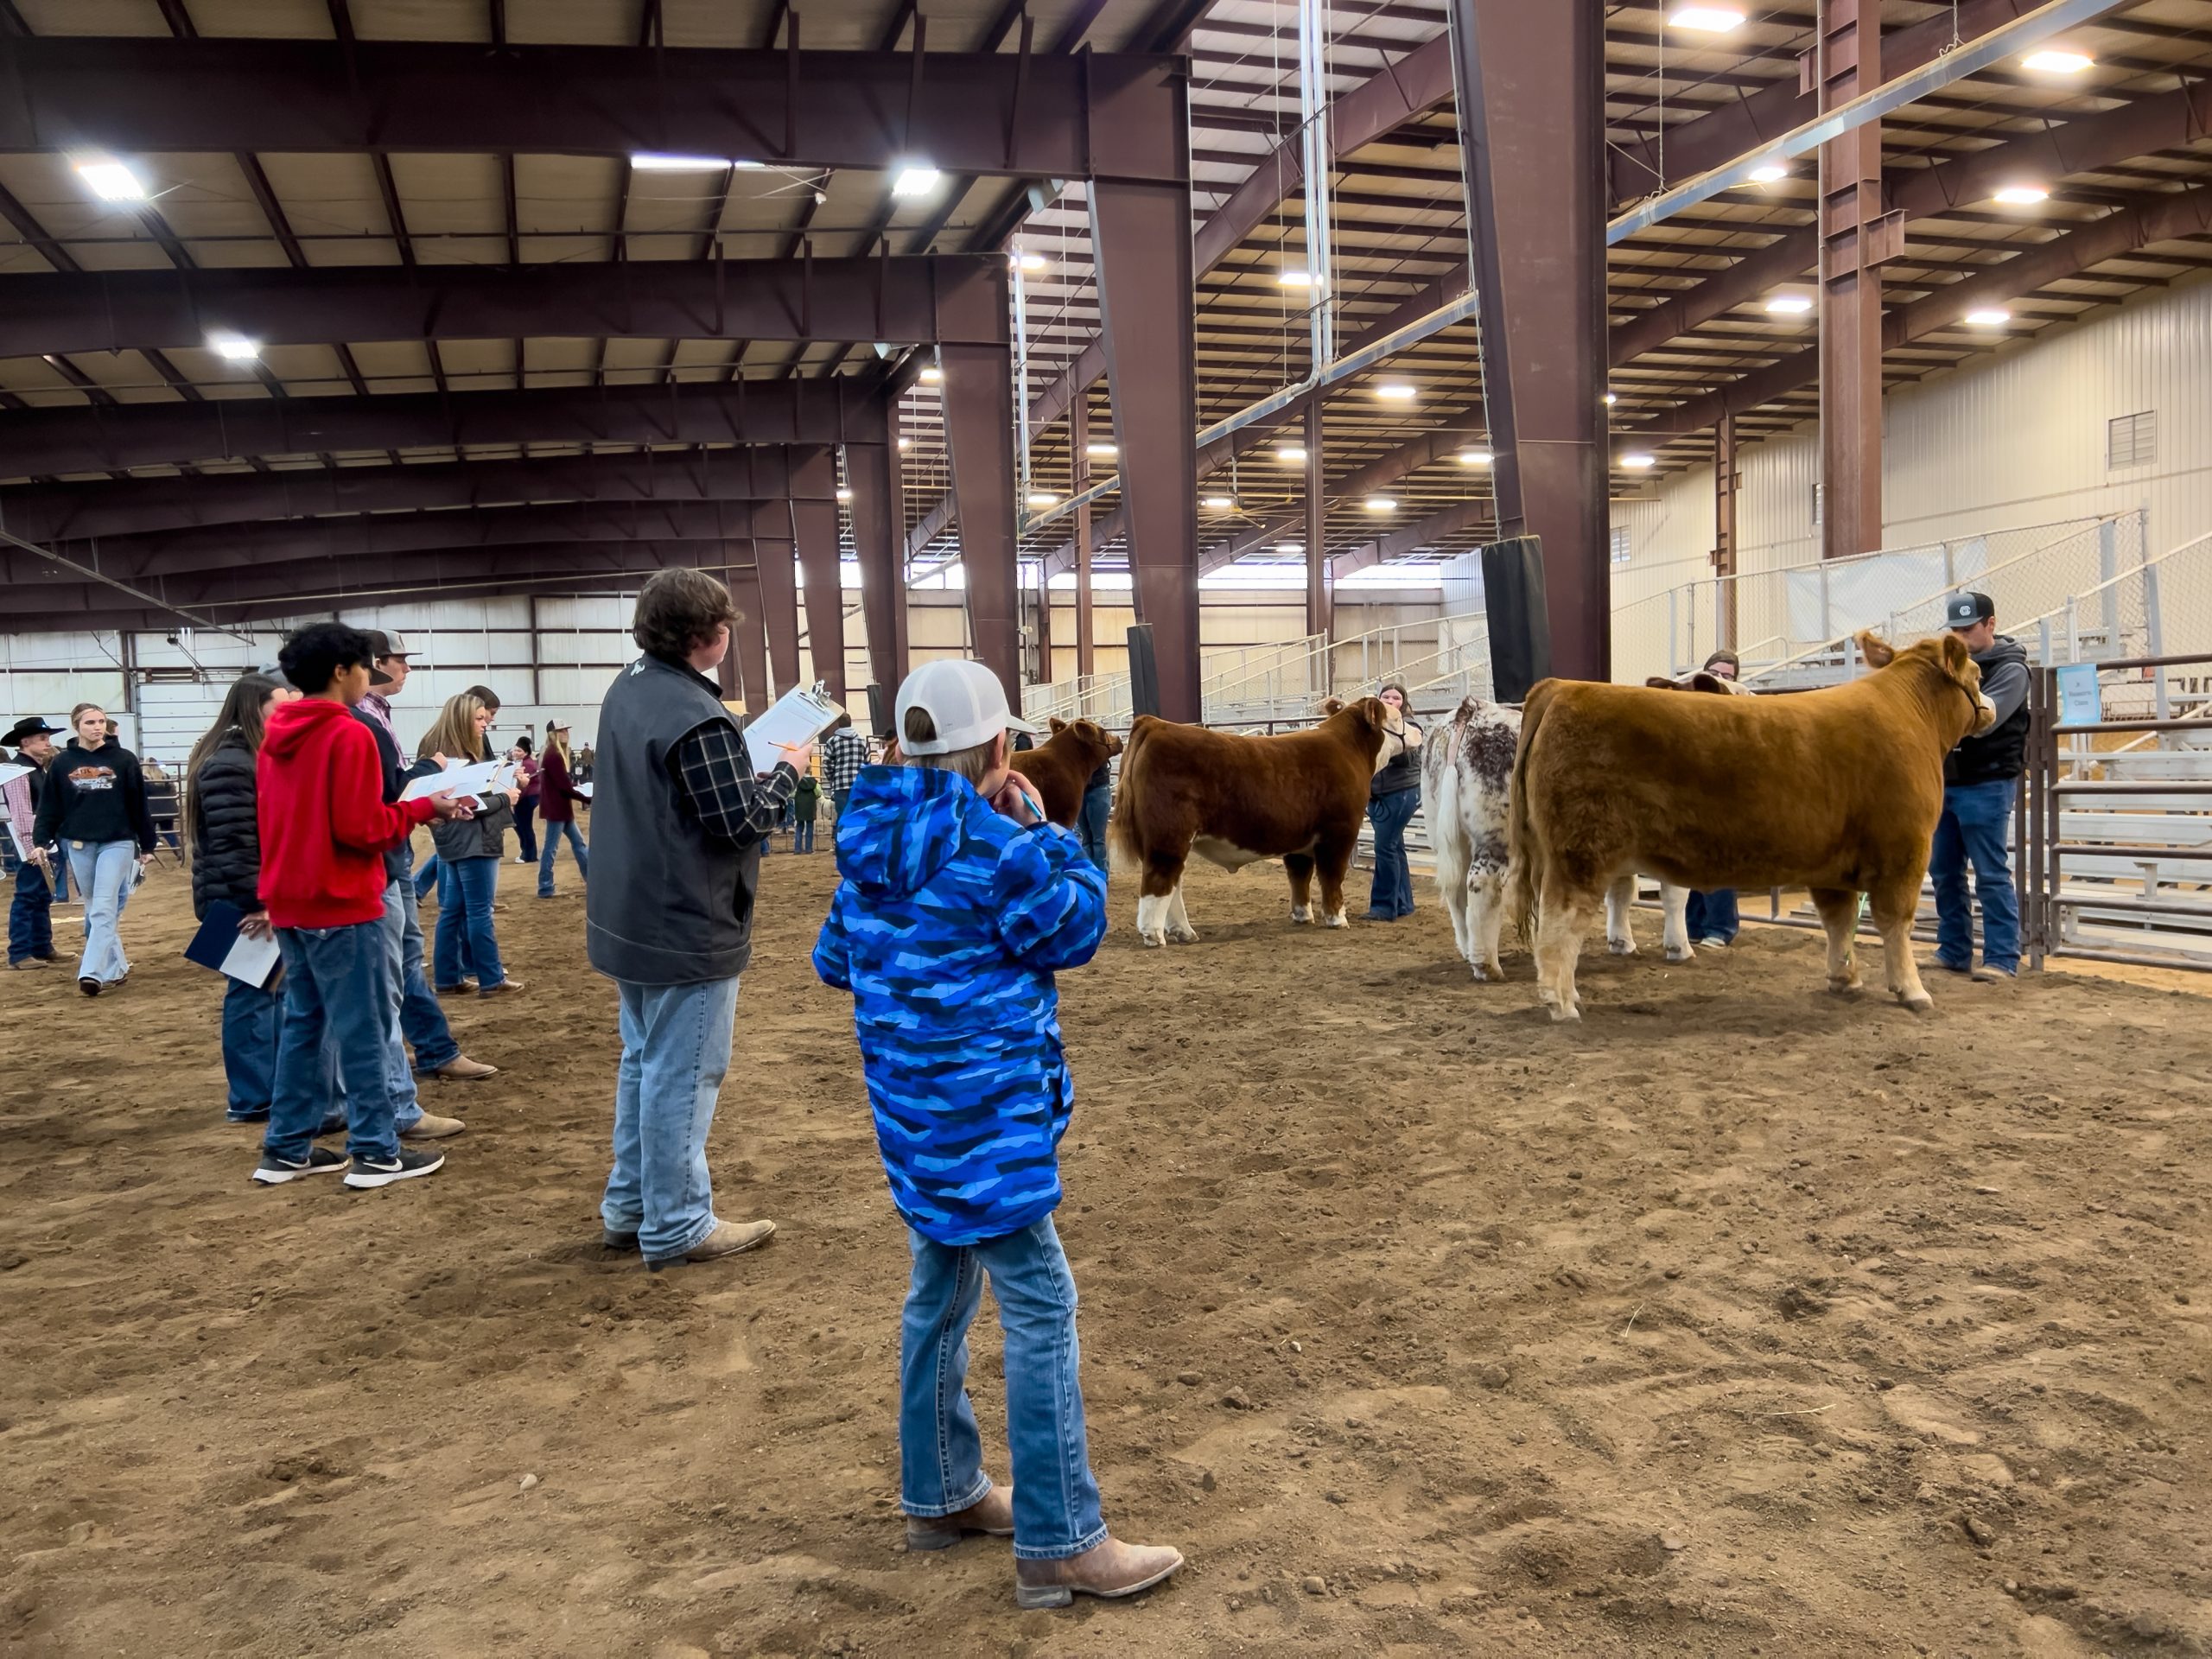 FFA and 4-H members from southwest Kansas particpated in a livestock judging contest March 27 in Dodge City, Kansas. (Journal photo by Kylene Scott.)